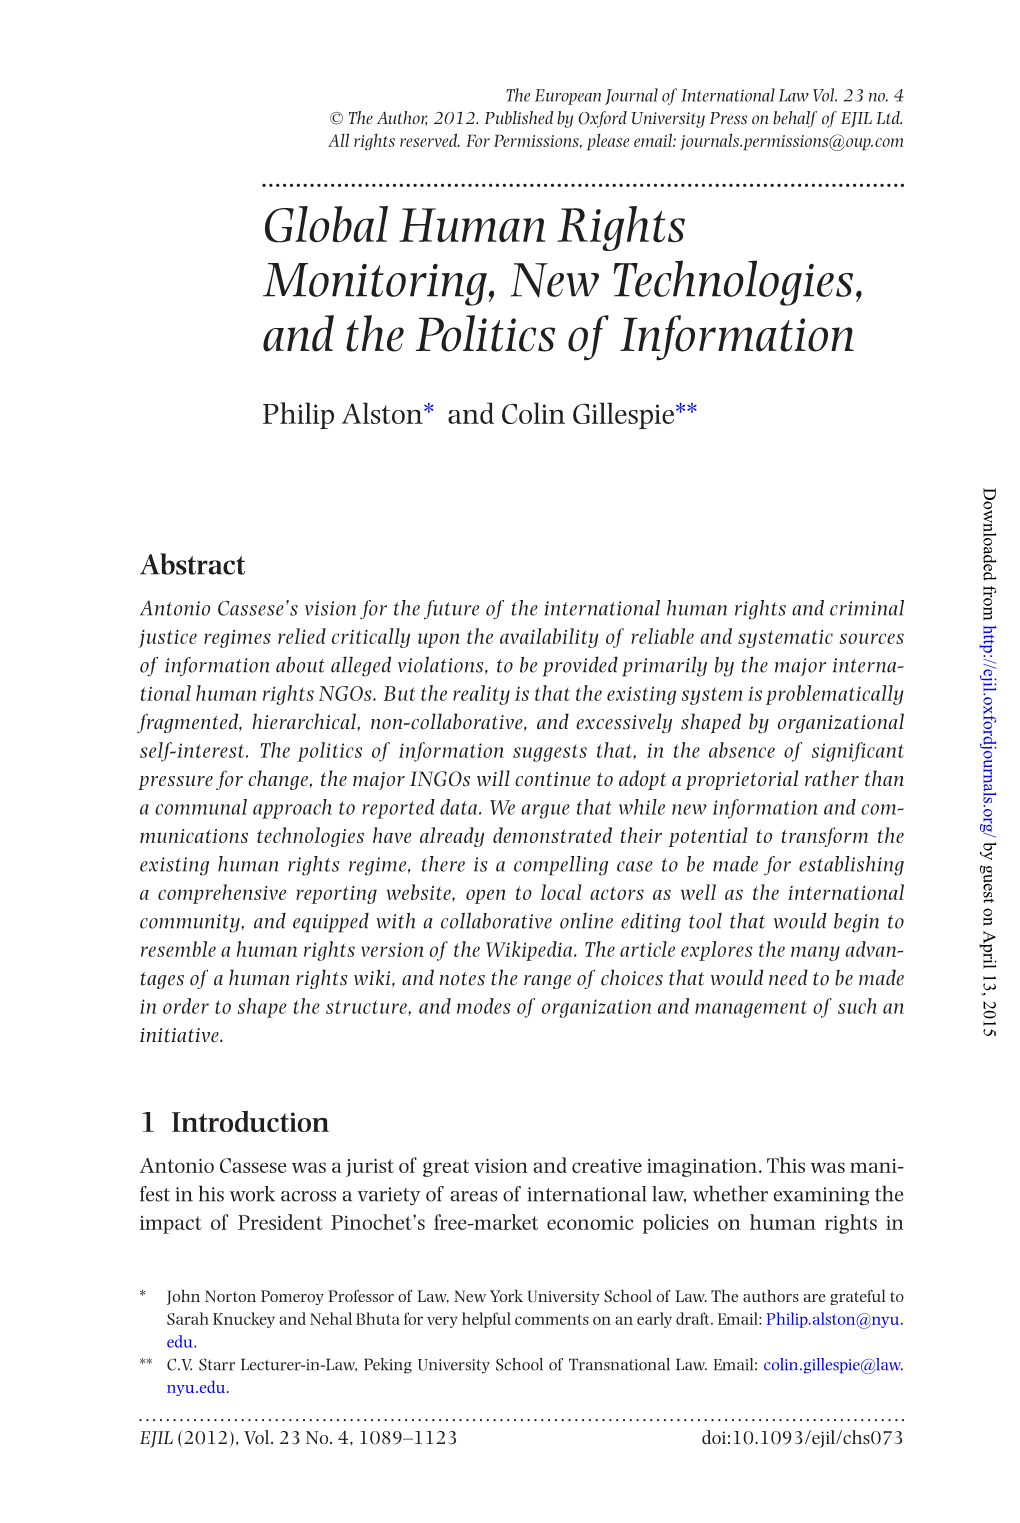 Global Human Rights Monitoring, New Technologies, and the Politics of Information